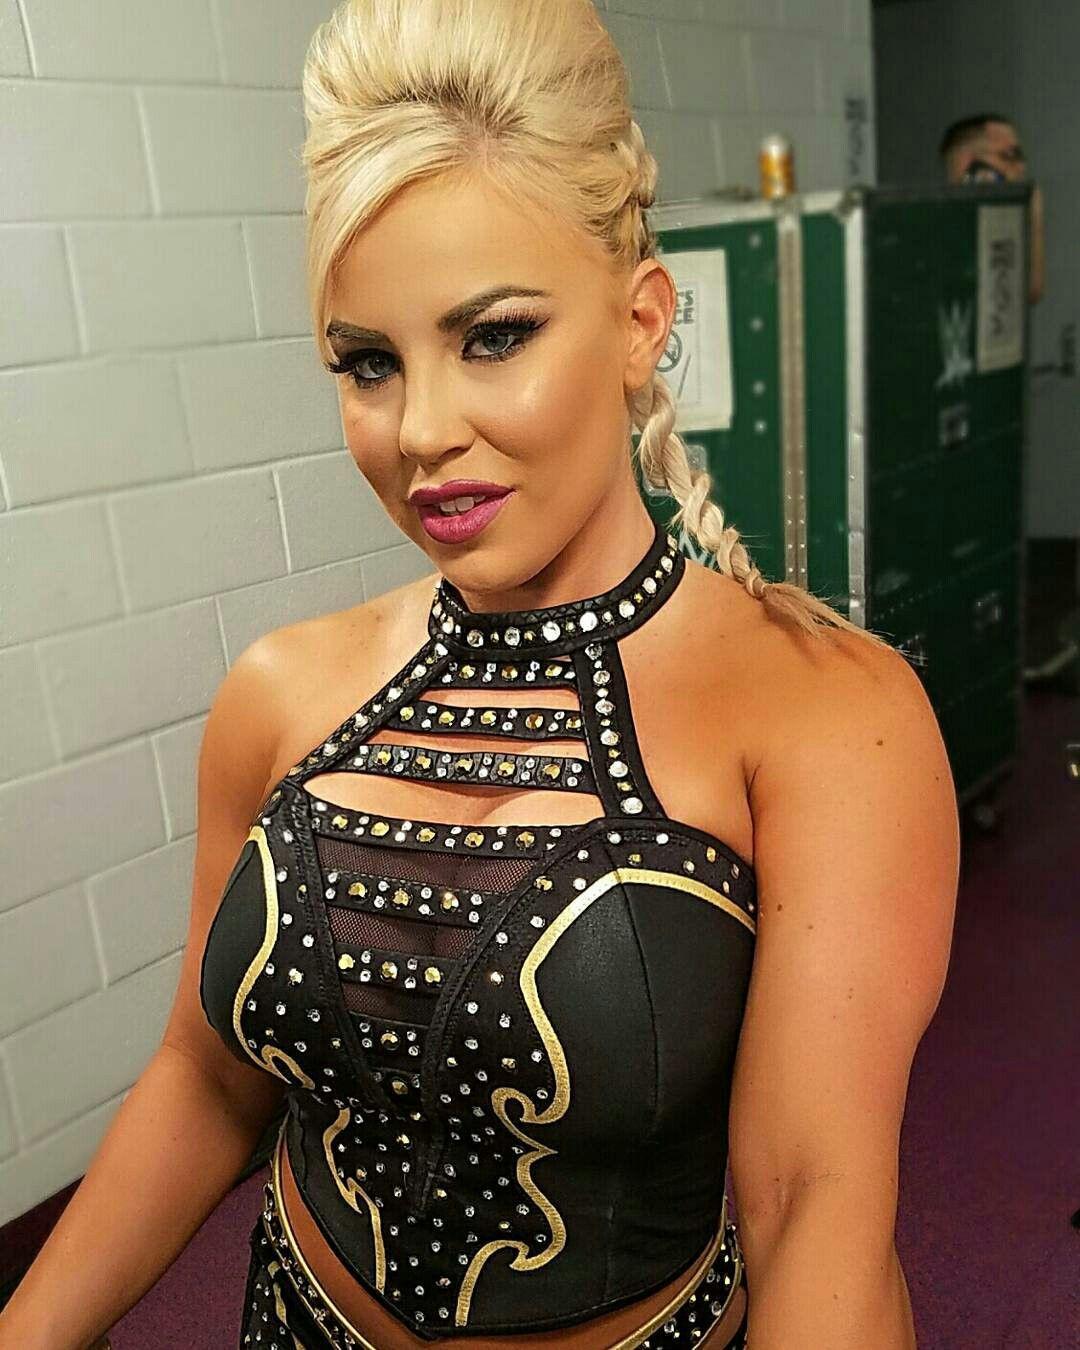 70+ Hot Pictures Of Dana Brooke Show Off This WWE Diva’s Sexy Body 576